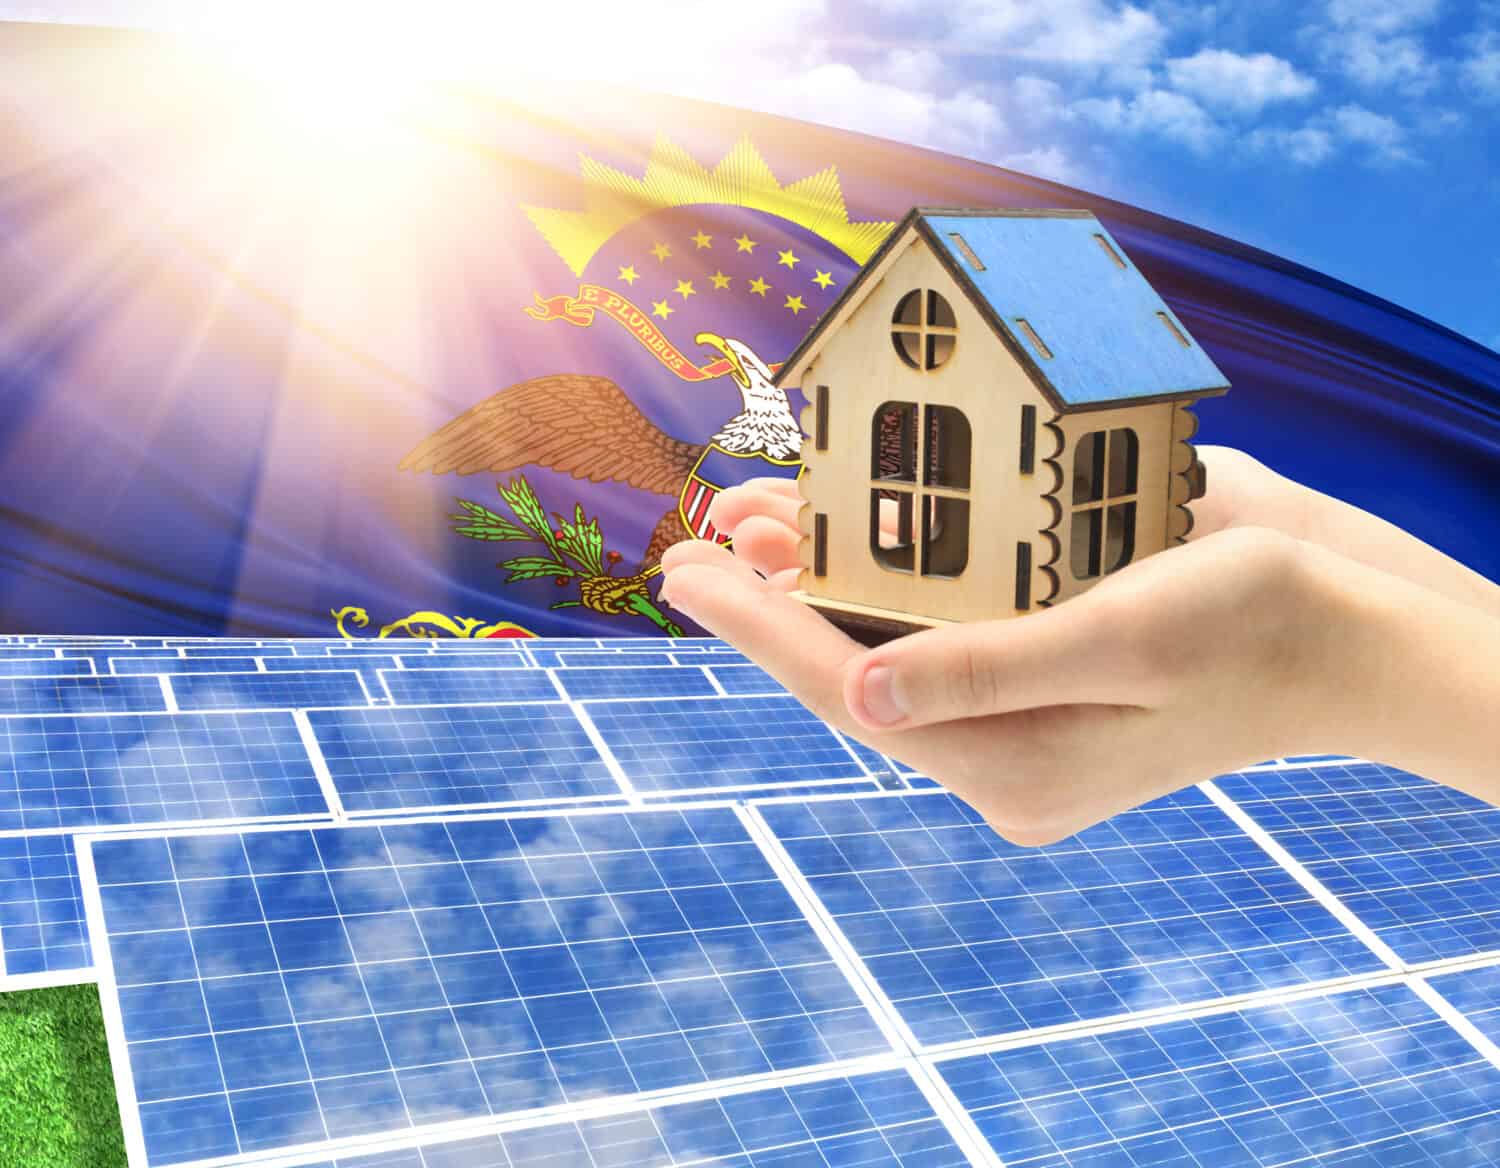 The photo with solar panels and a woman's palm holding a toy house shows the flag State of North Dakota in the sun.